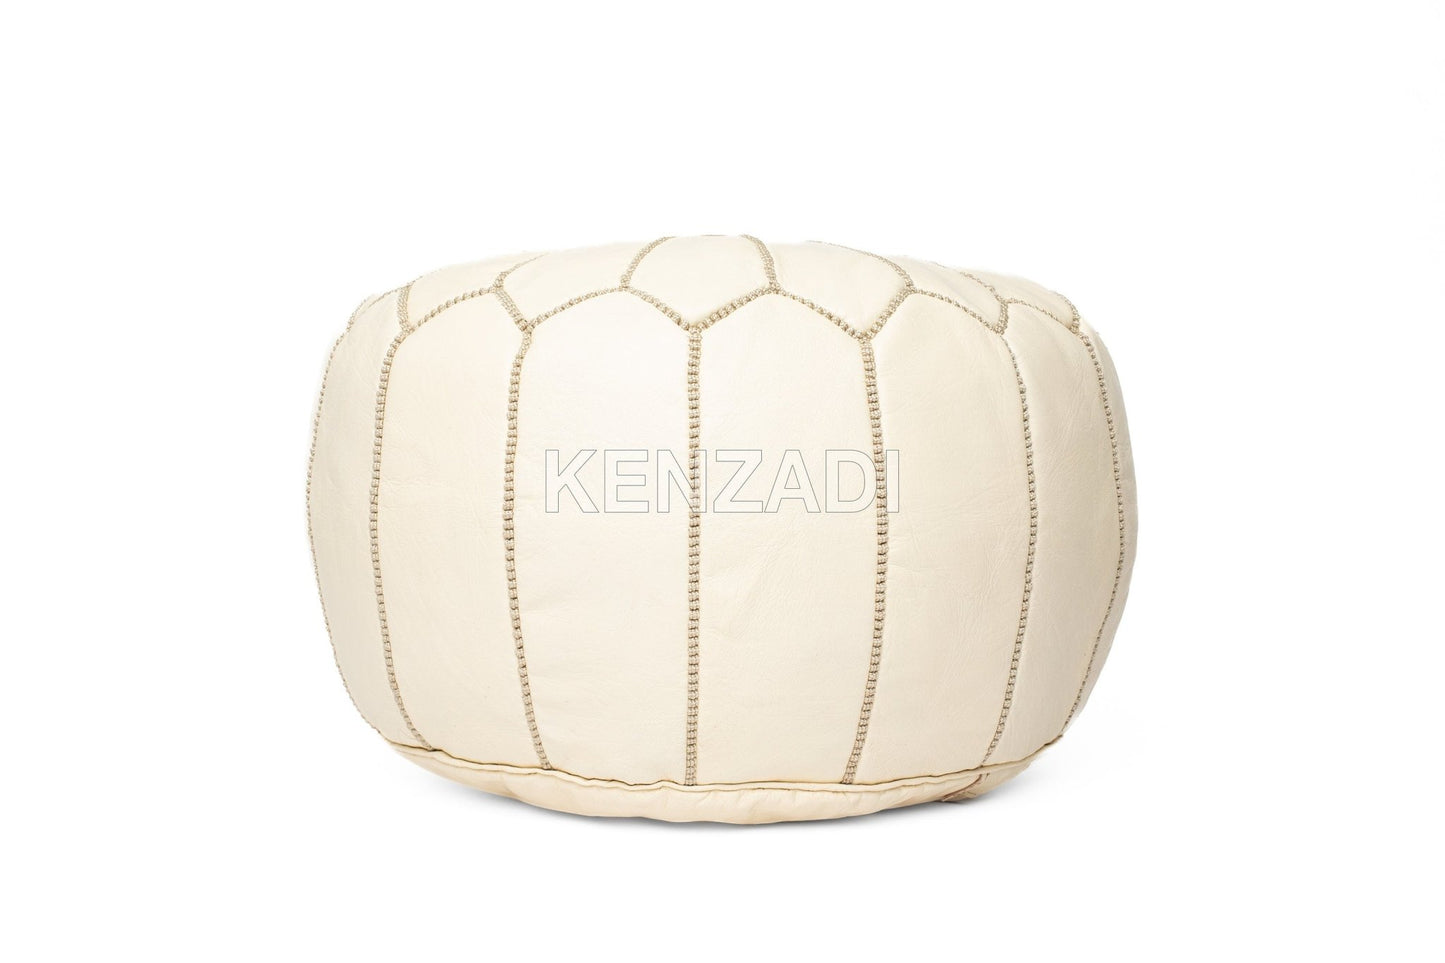 Authentic Moroccan leather pouf with beige embroidery, perfect for adding a bohemian touch to your home décor